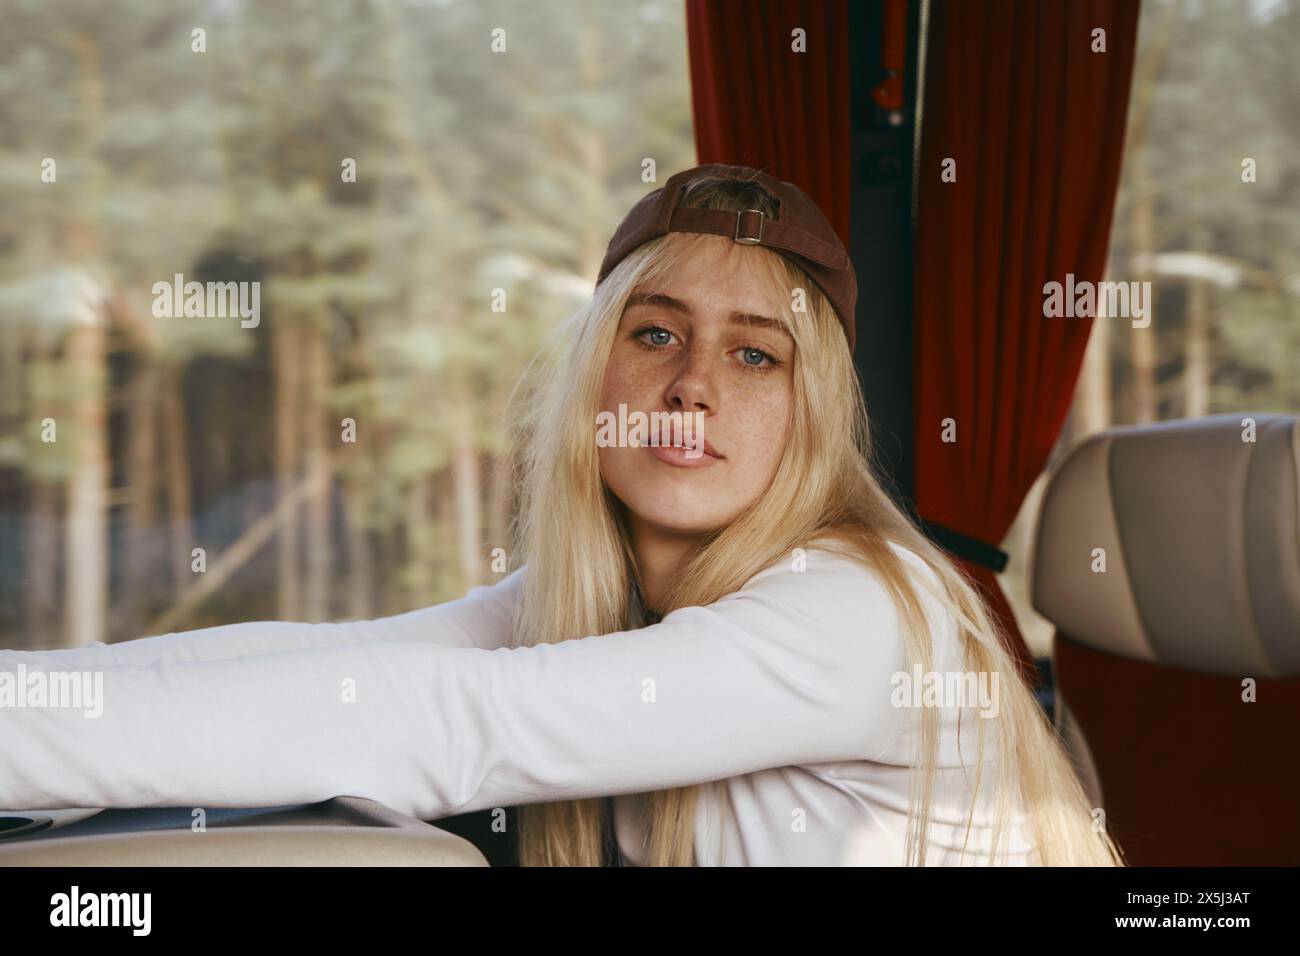 Young woman travelling by bus. Stock Photo